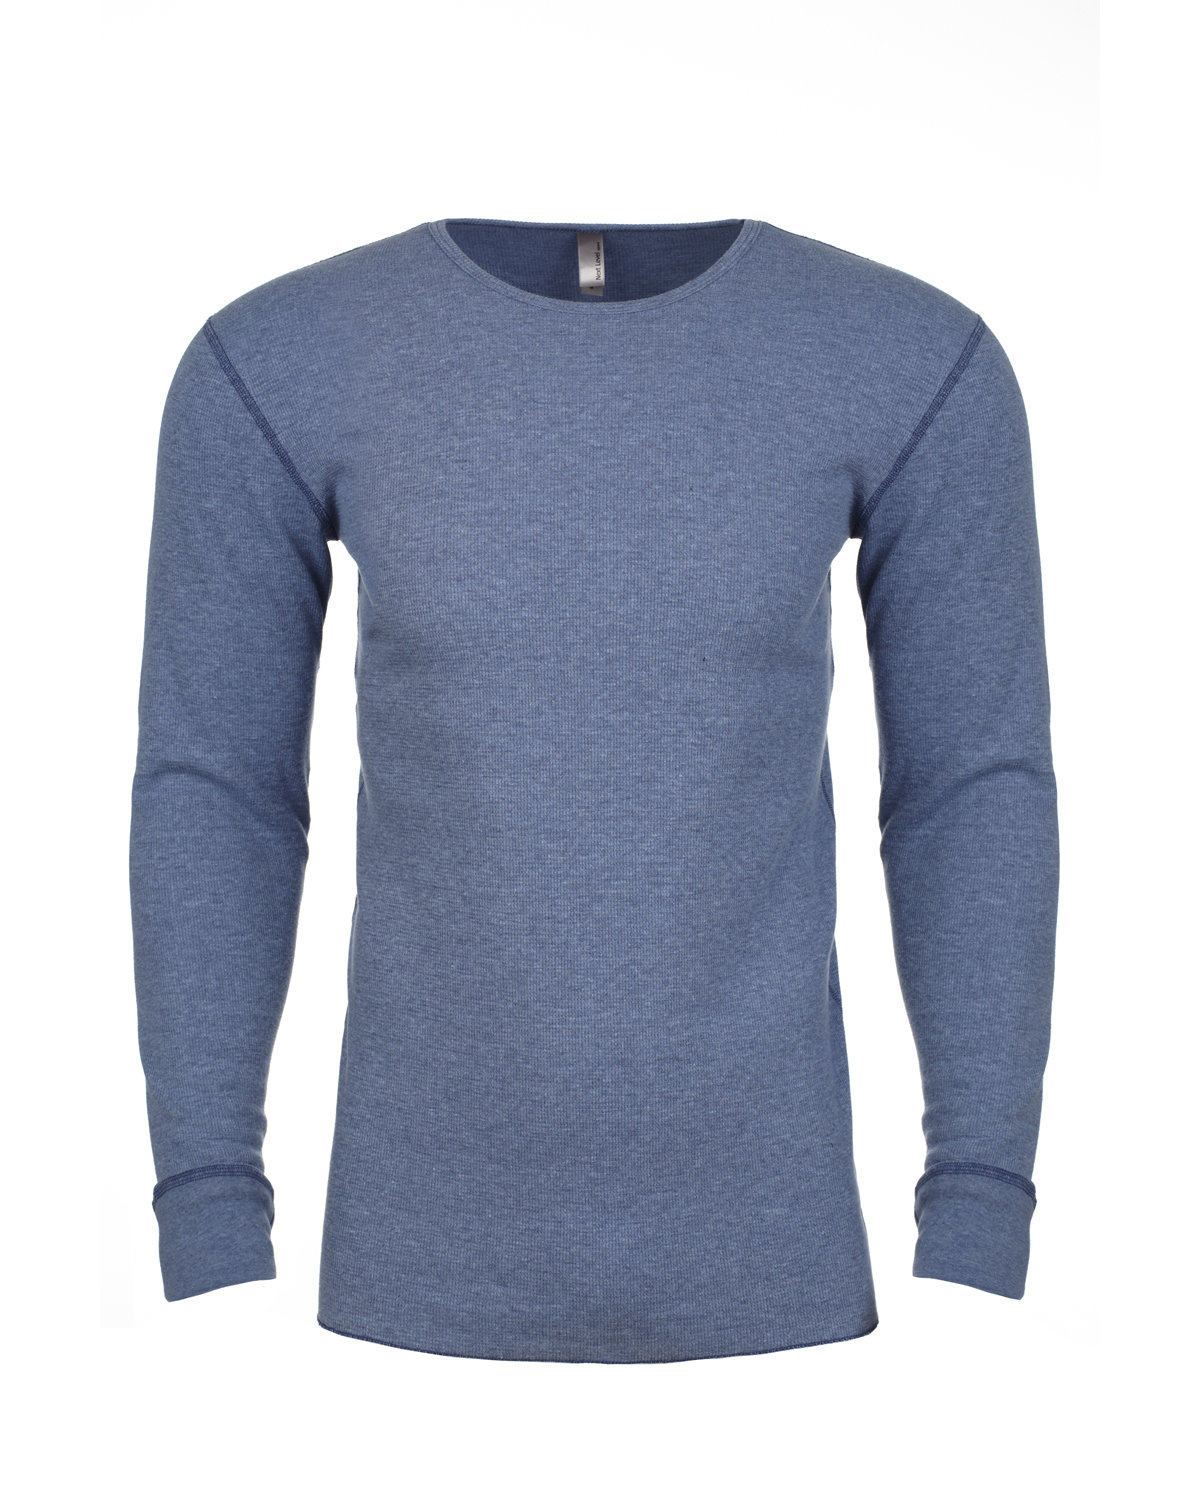 Buy Adult Long-Sleeve Thermal - Next Level Apparel Online at Best price ...